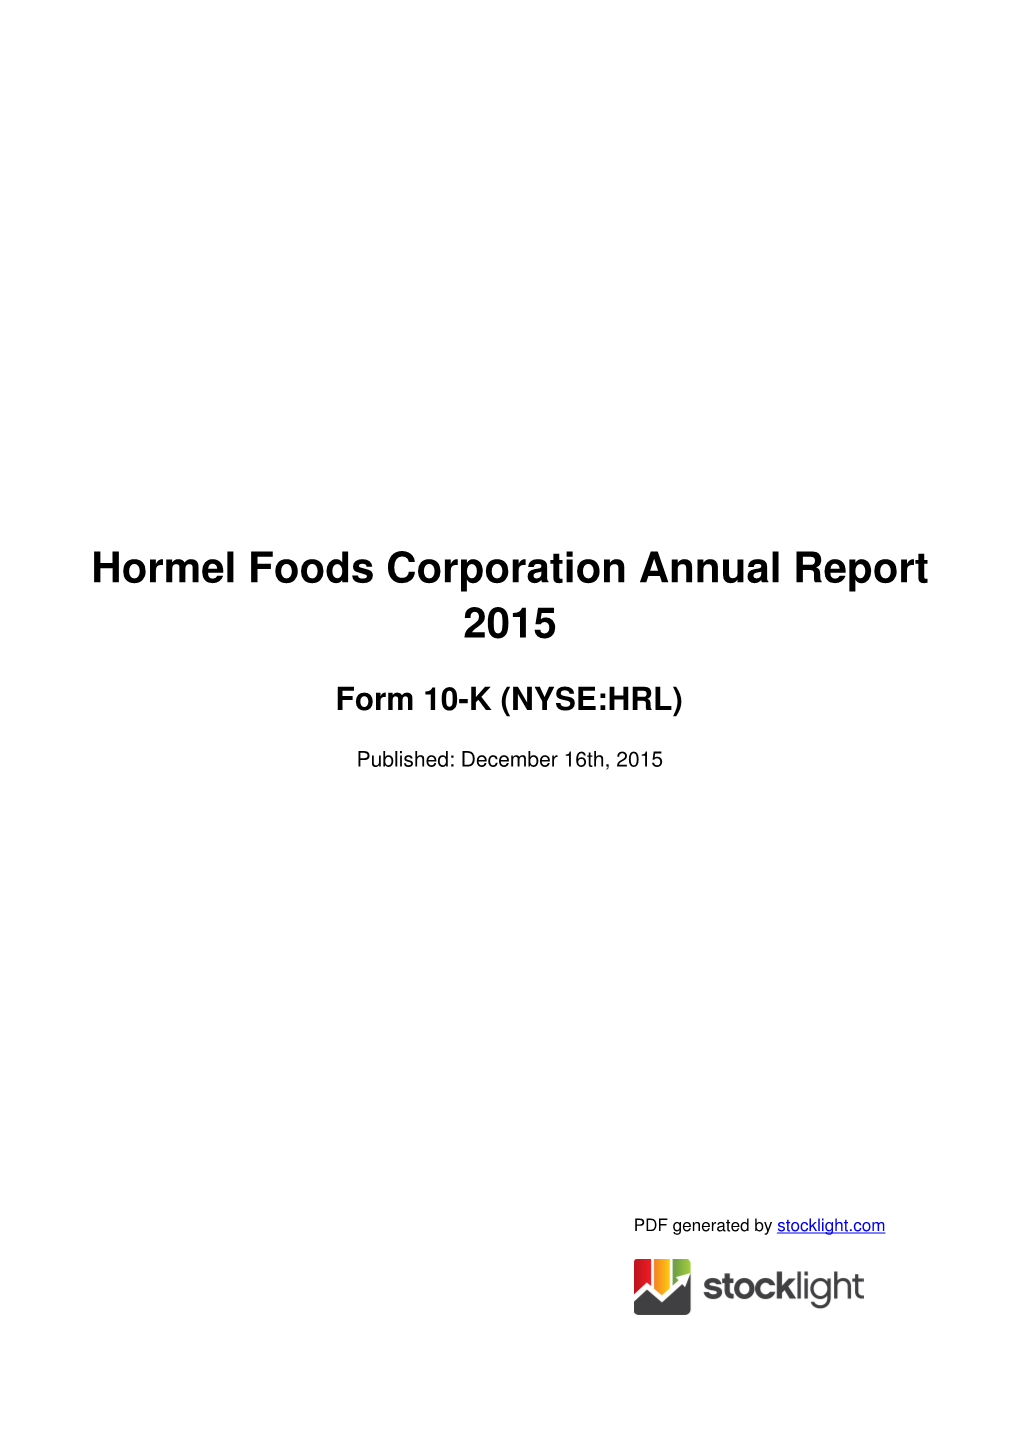 Hormel Foods Corporation Annual Report 2015